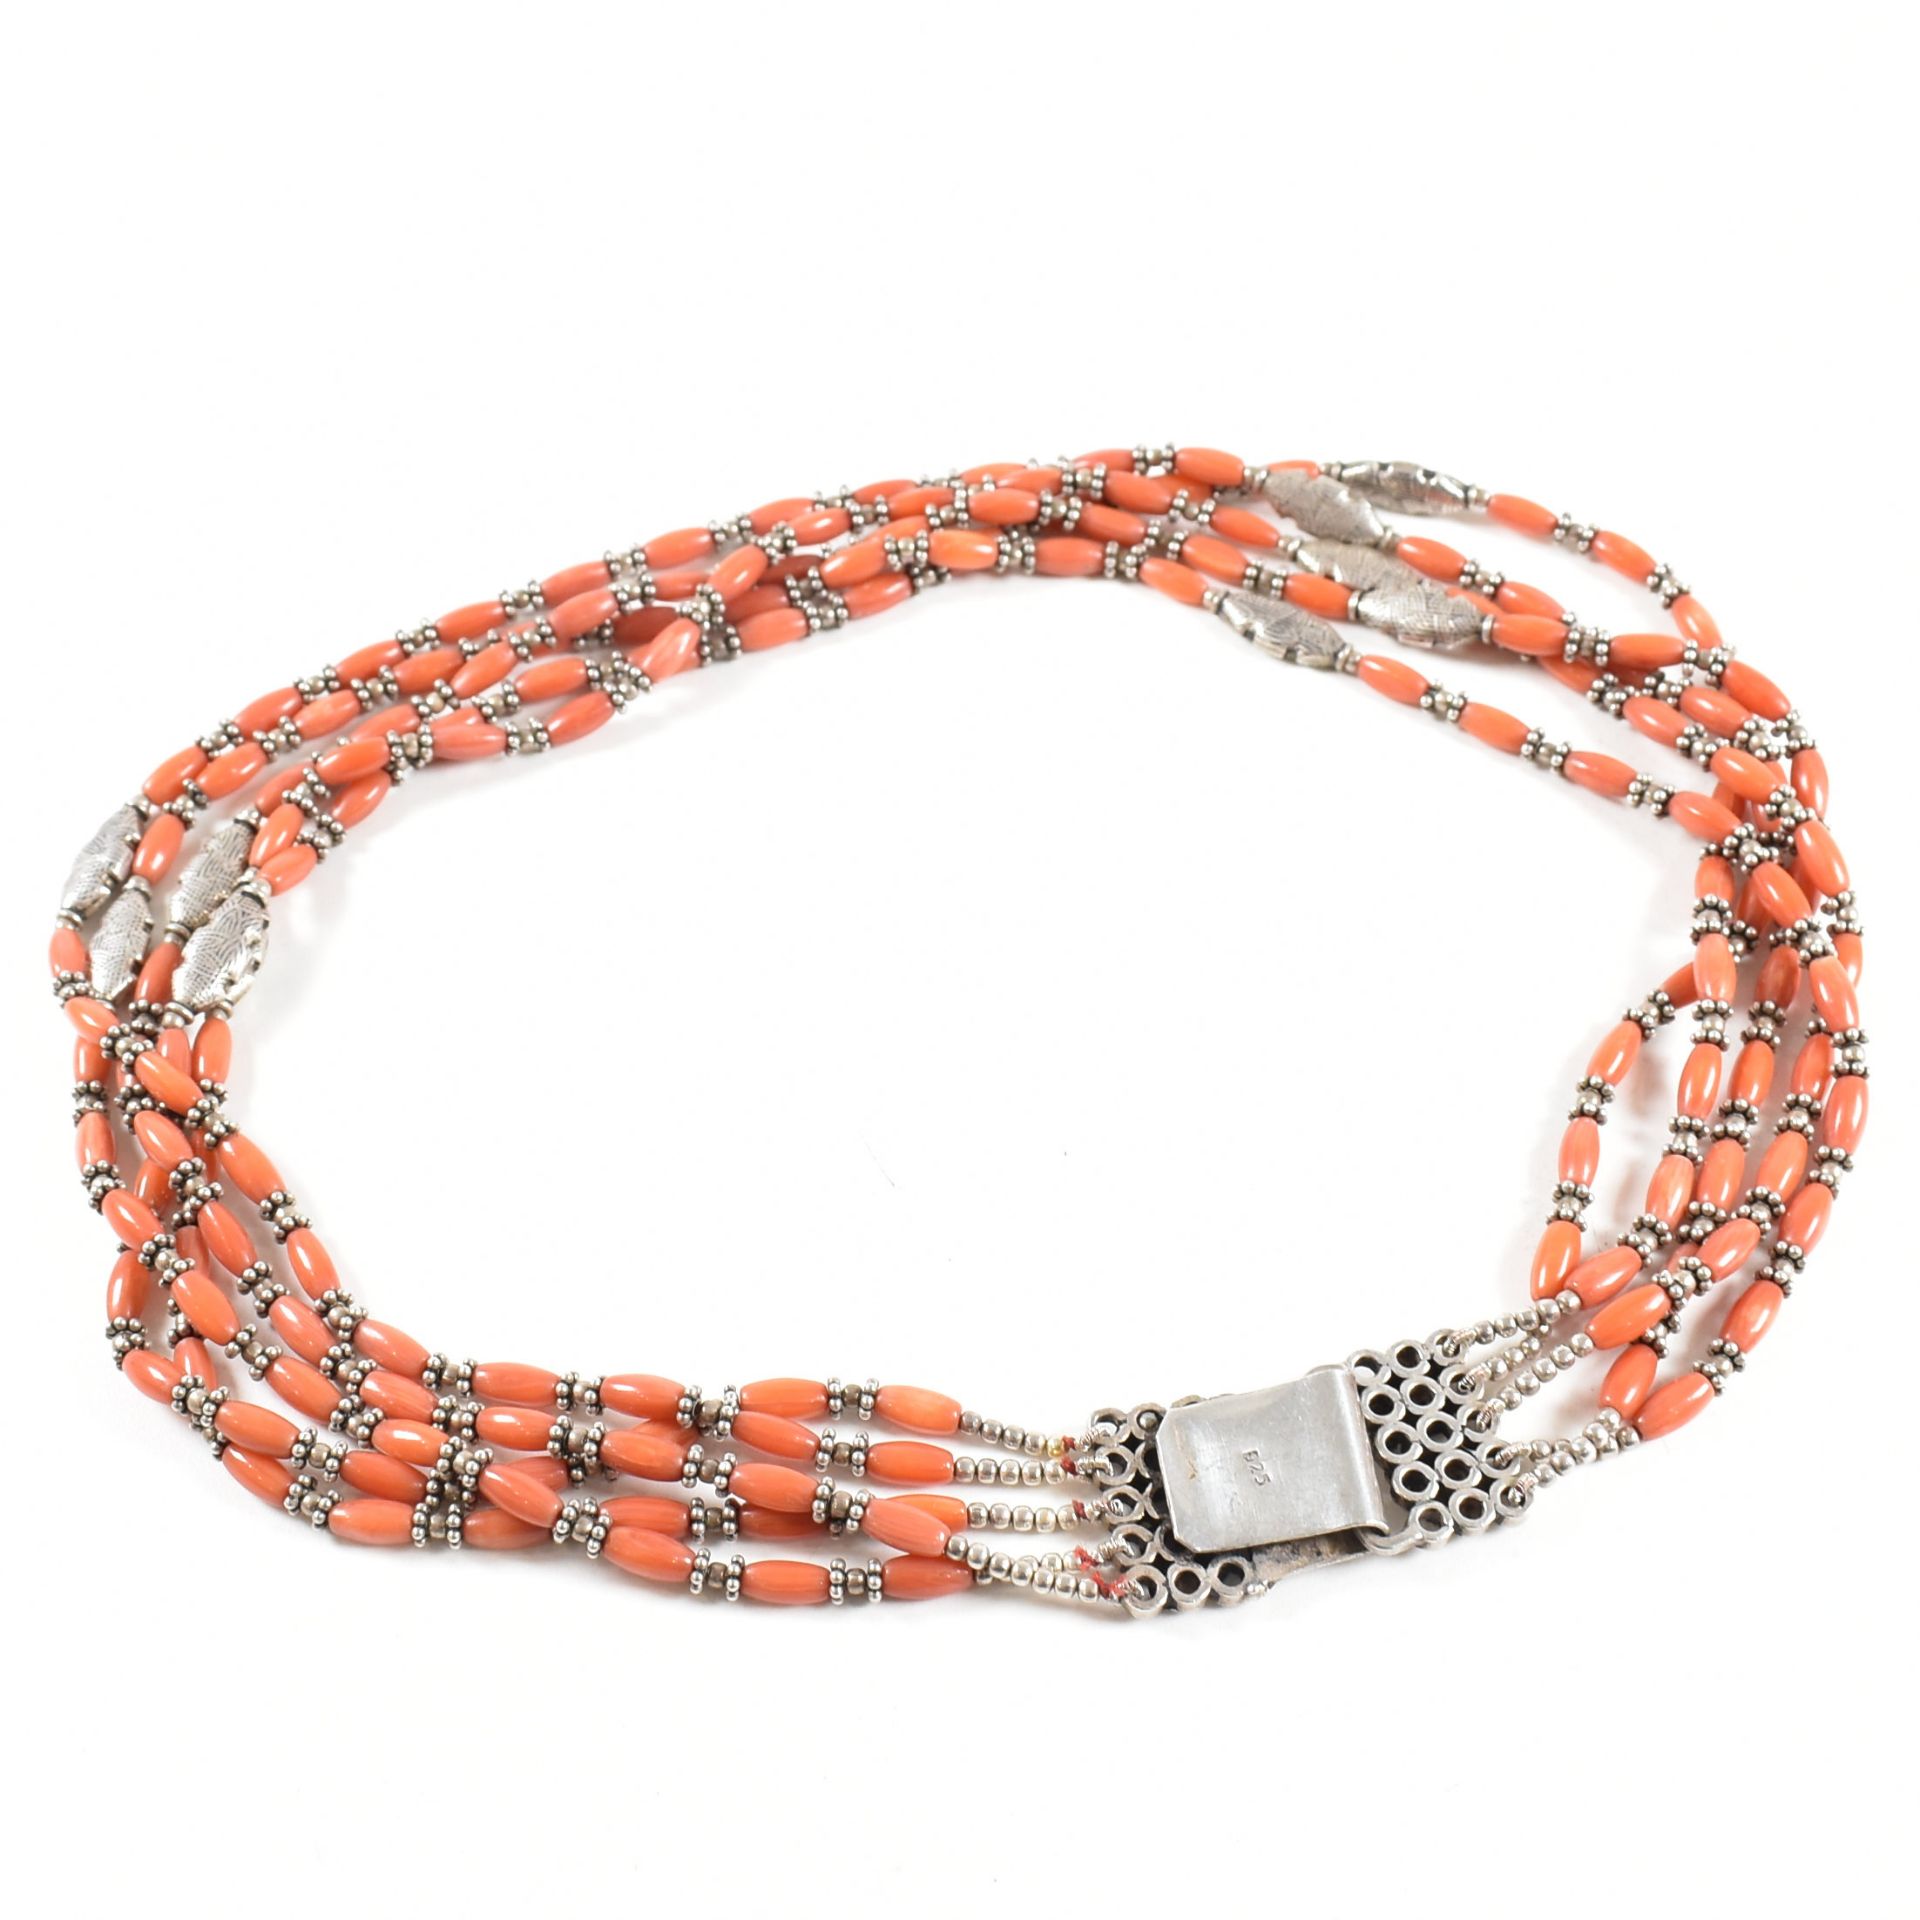 925 SILVER & CORAL 5 STRAND BEADED NECKLACE - Image 3 of 5